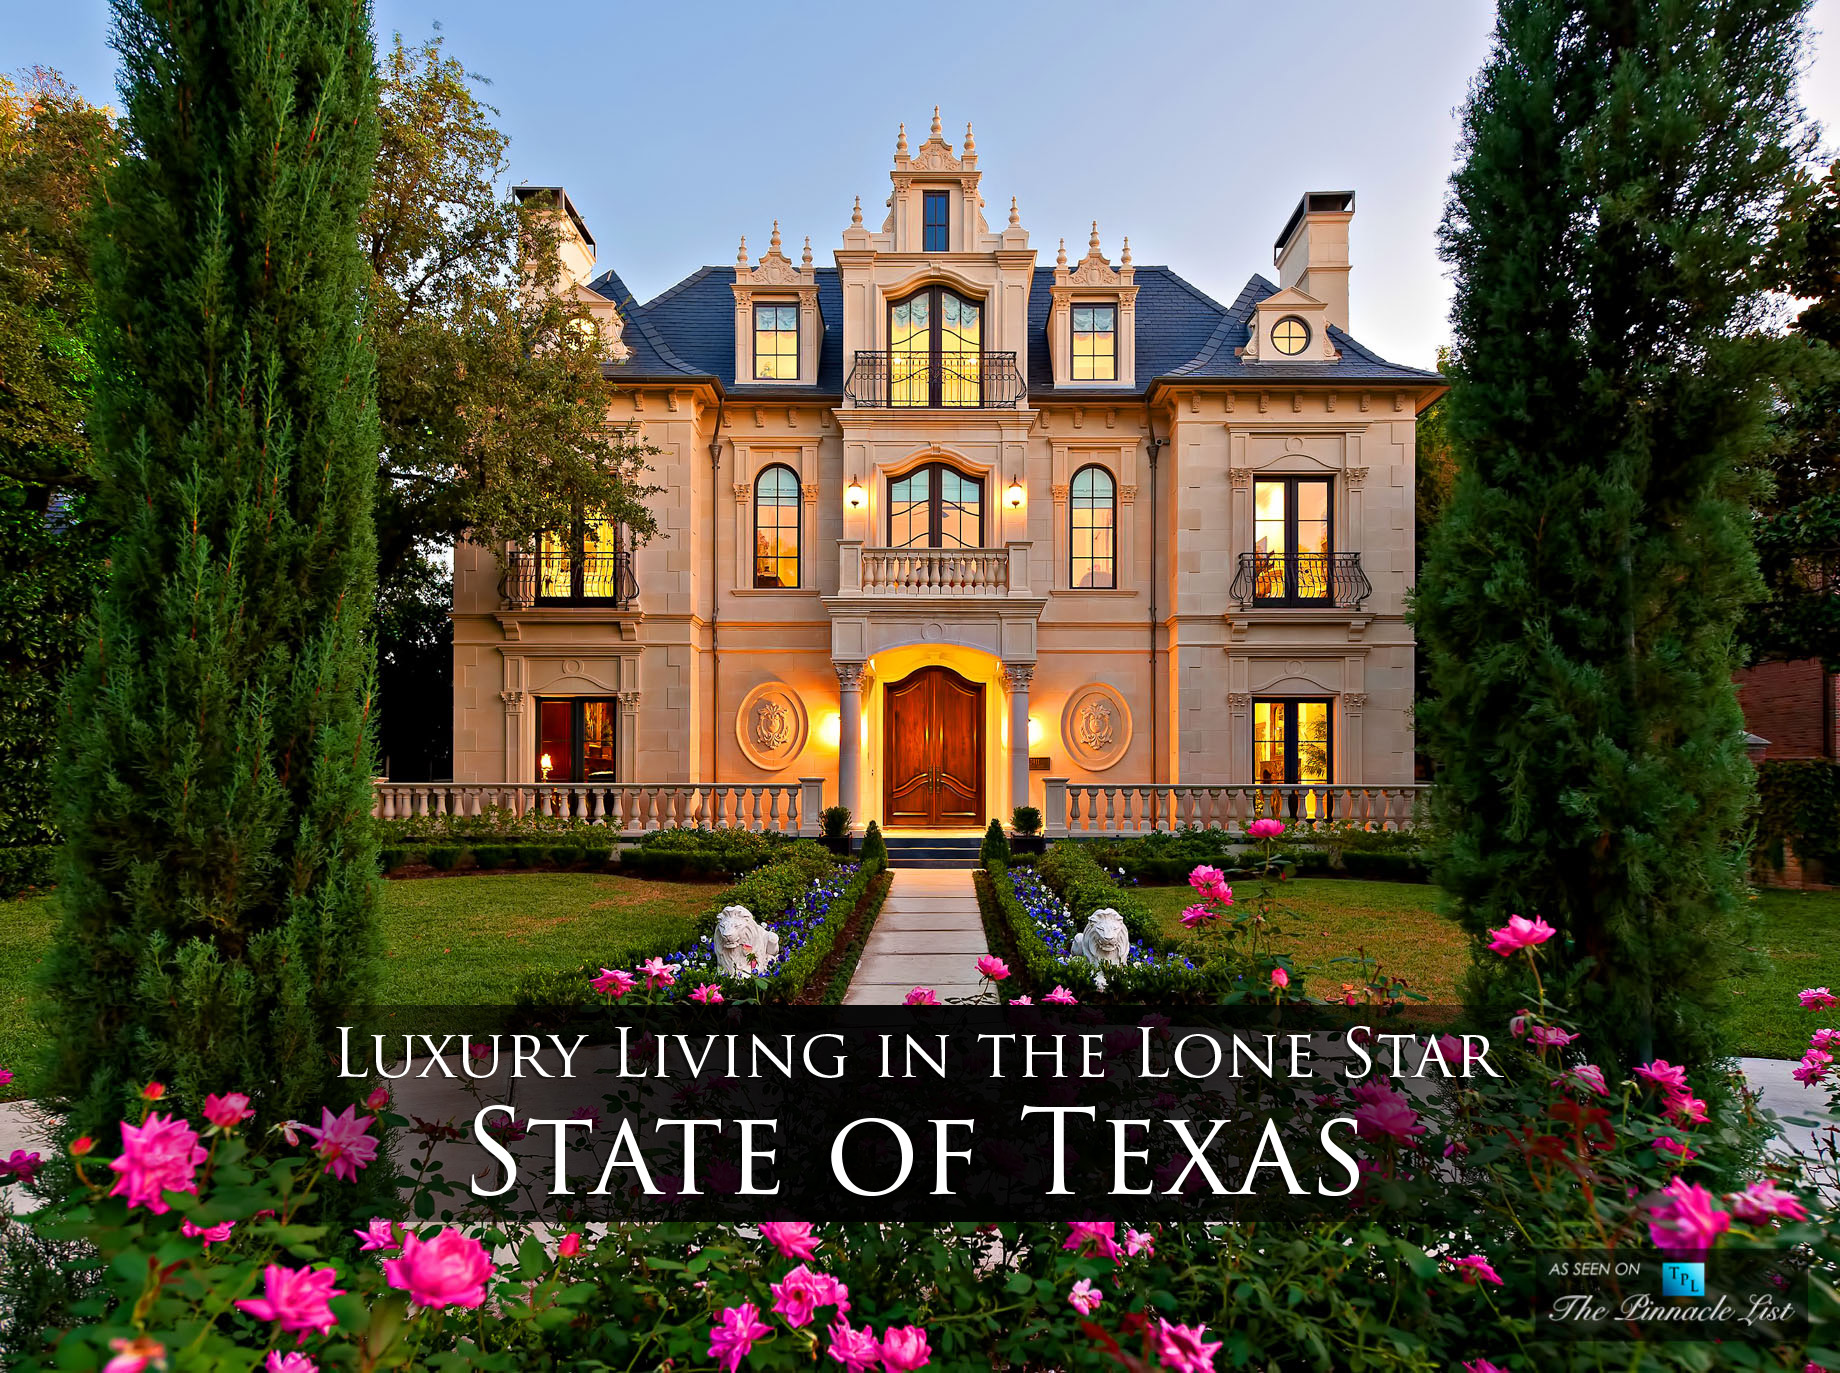 Luxury Living in the Lone Star State of Texas